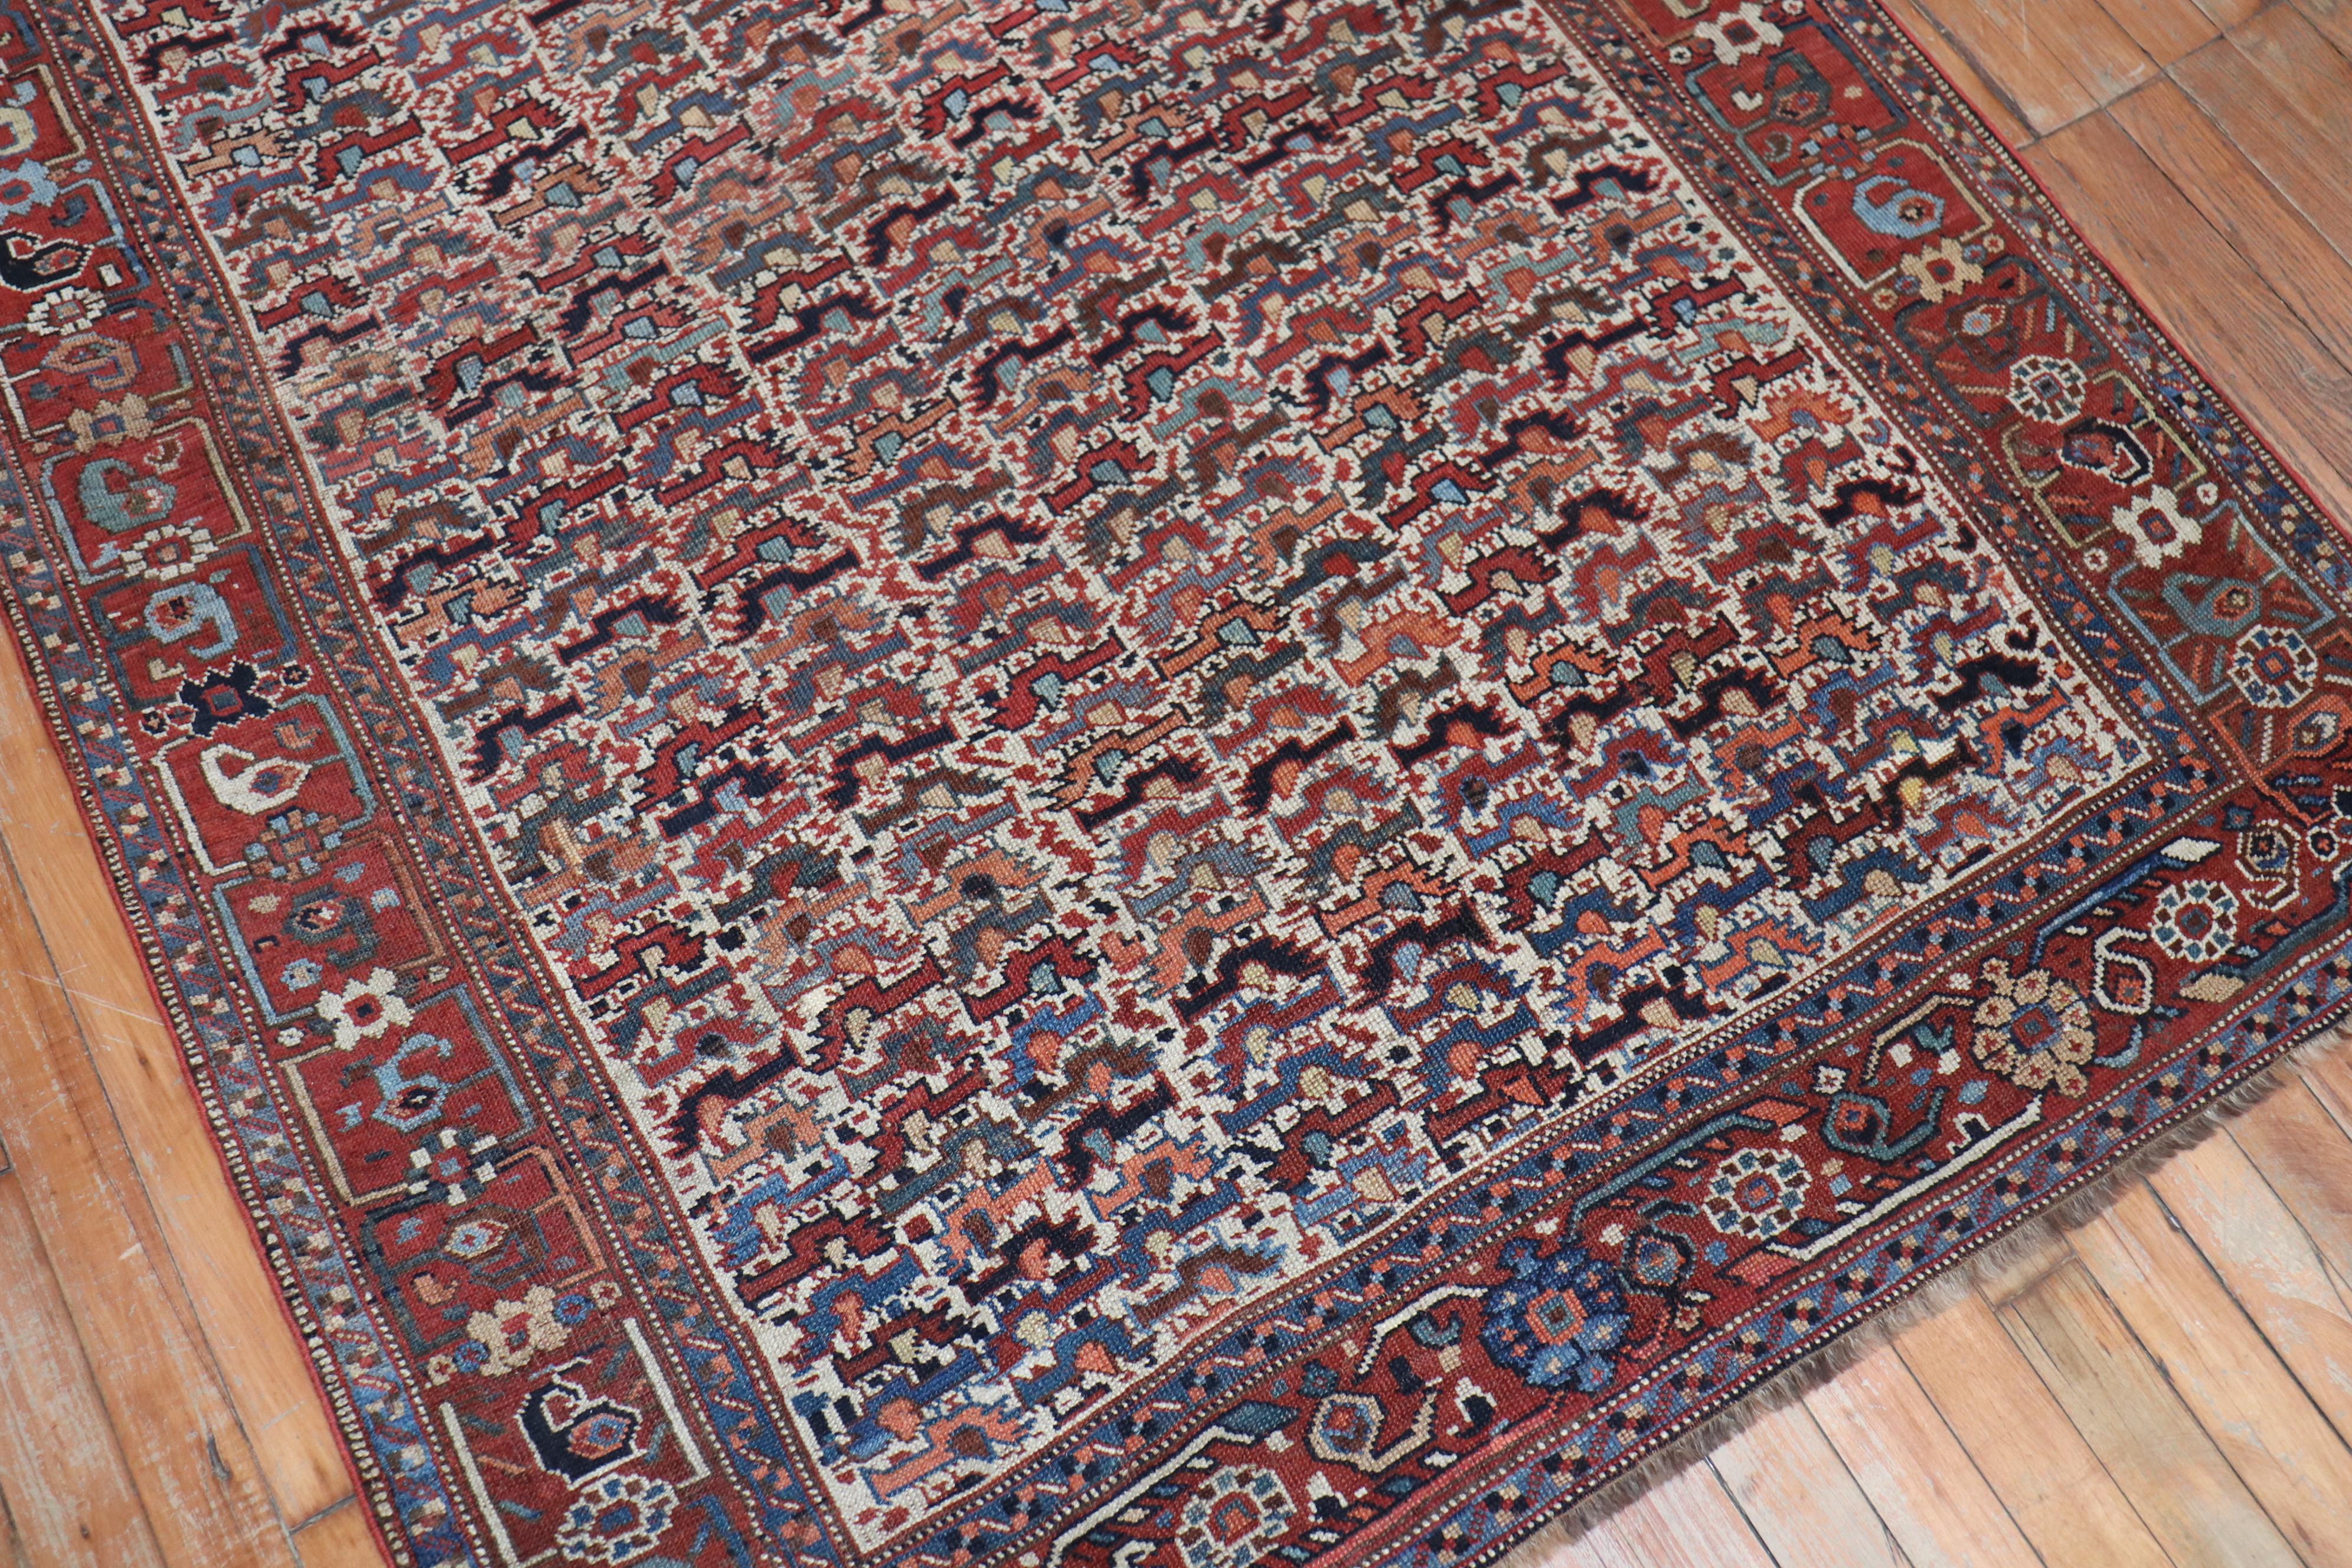 An early 20th century Persian Tribal Afshar Shiraz carpet with an all-over chicken motif on an ivory field, rustic accents

Measures: 4'2” x 5'11”.